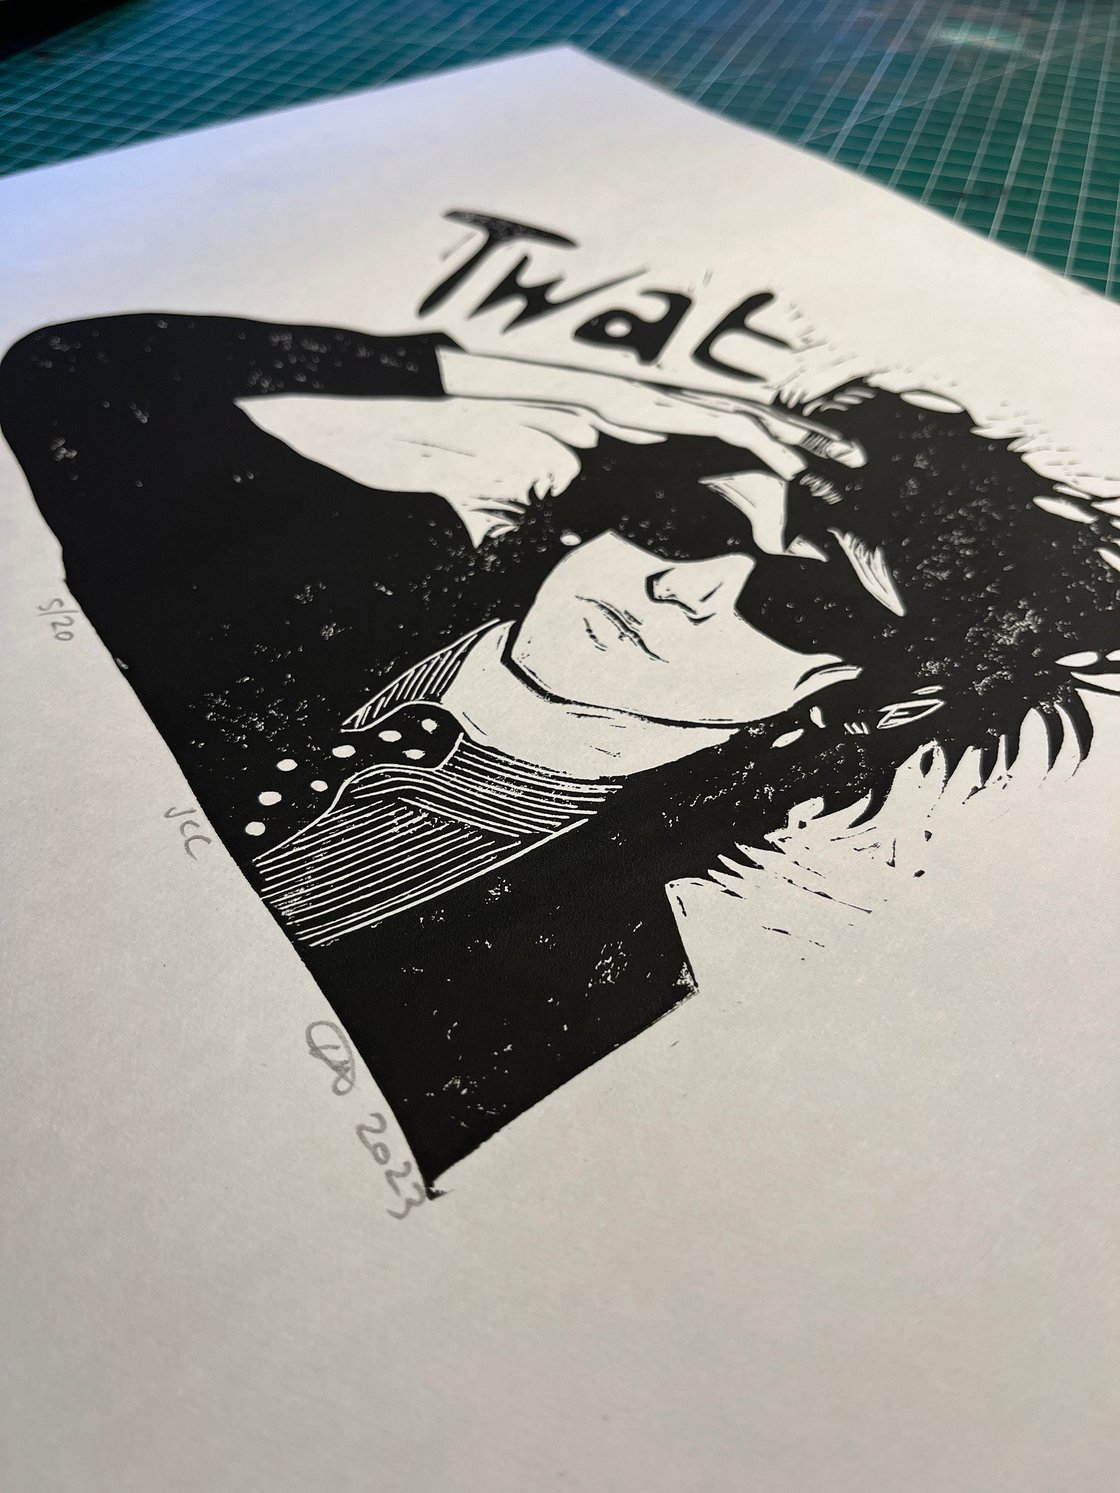 Image of John Cooper Clarke. T**t. Hand Made. Original A3 linocut print. Limited and Signed. Art.